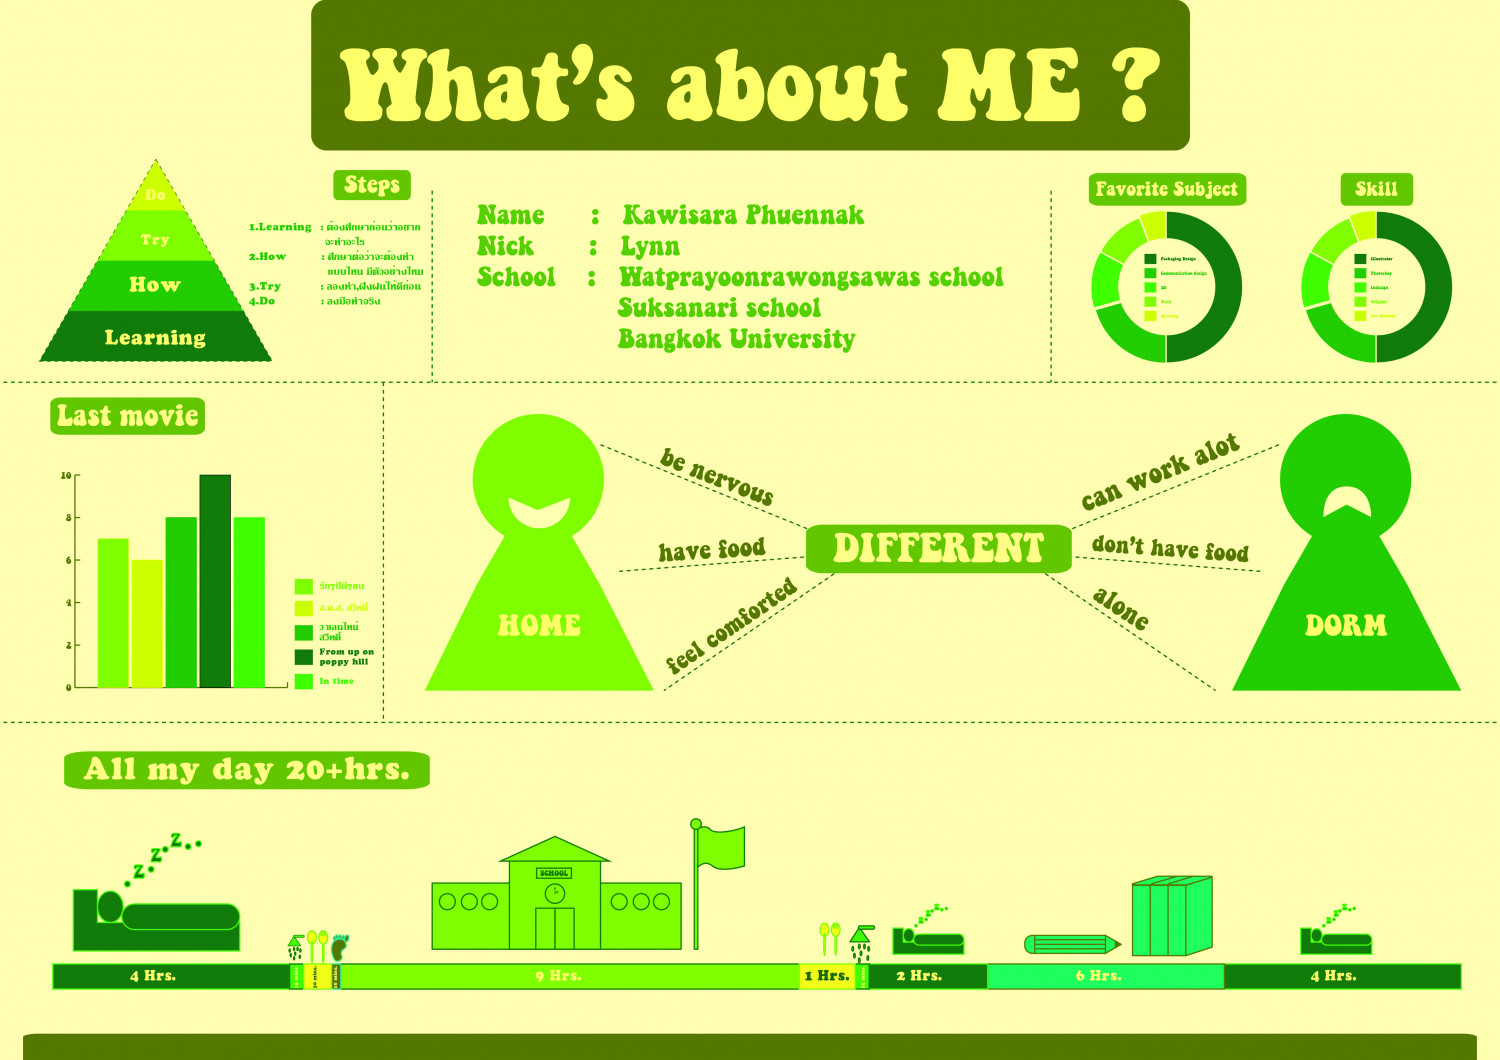 All About Me! | How to create infographics, Social media infographic, Infographic